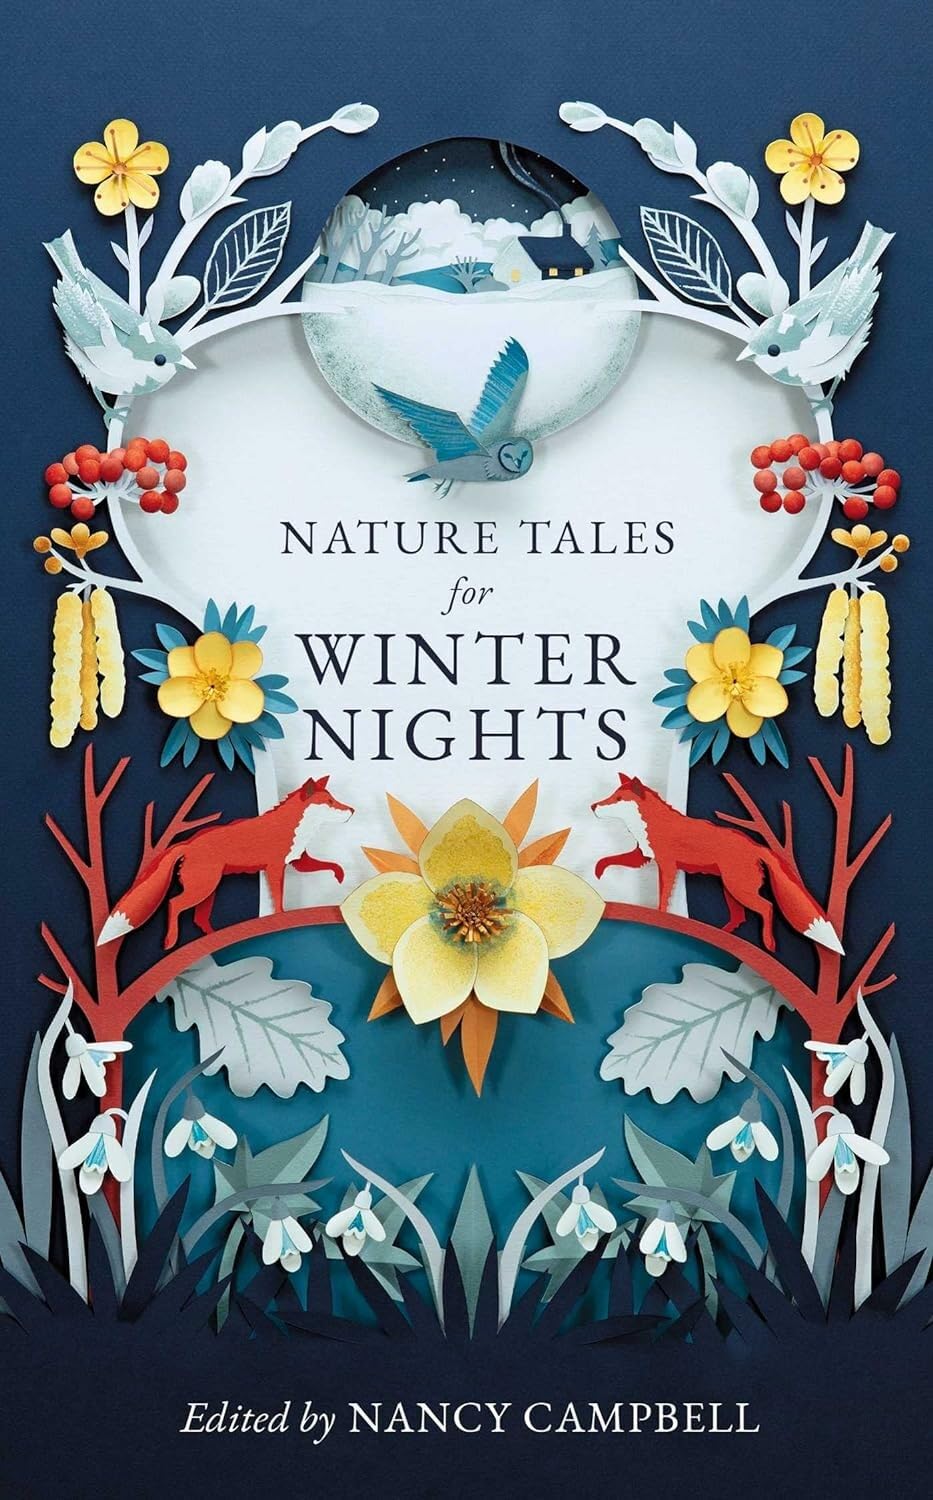 Elliott & Thompson Nature Tales for Winter Nights Book by Nancy Campbell